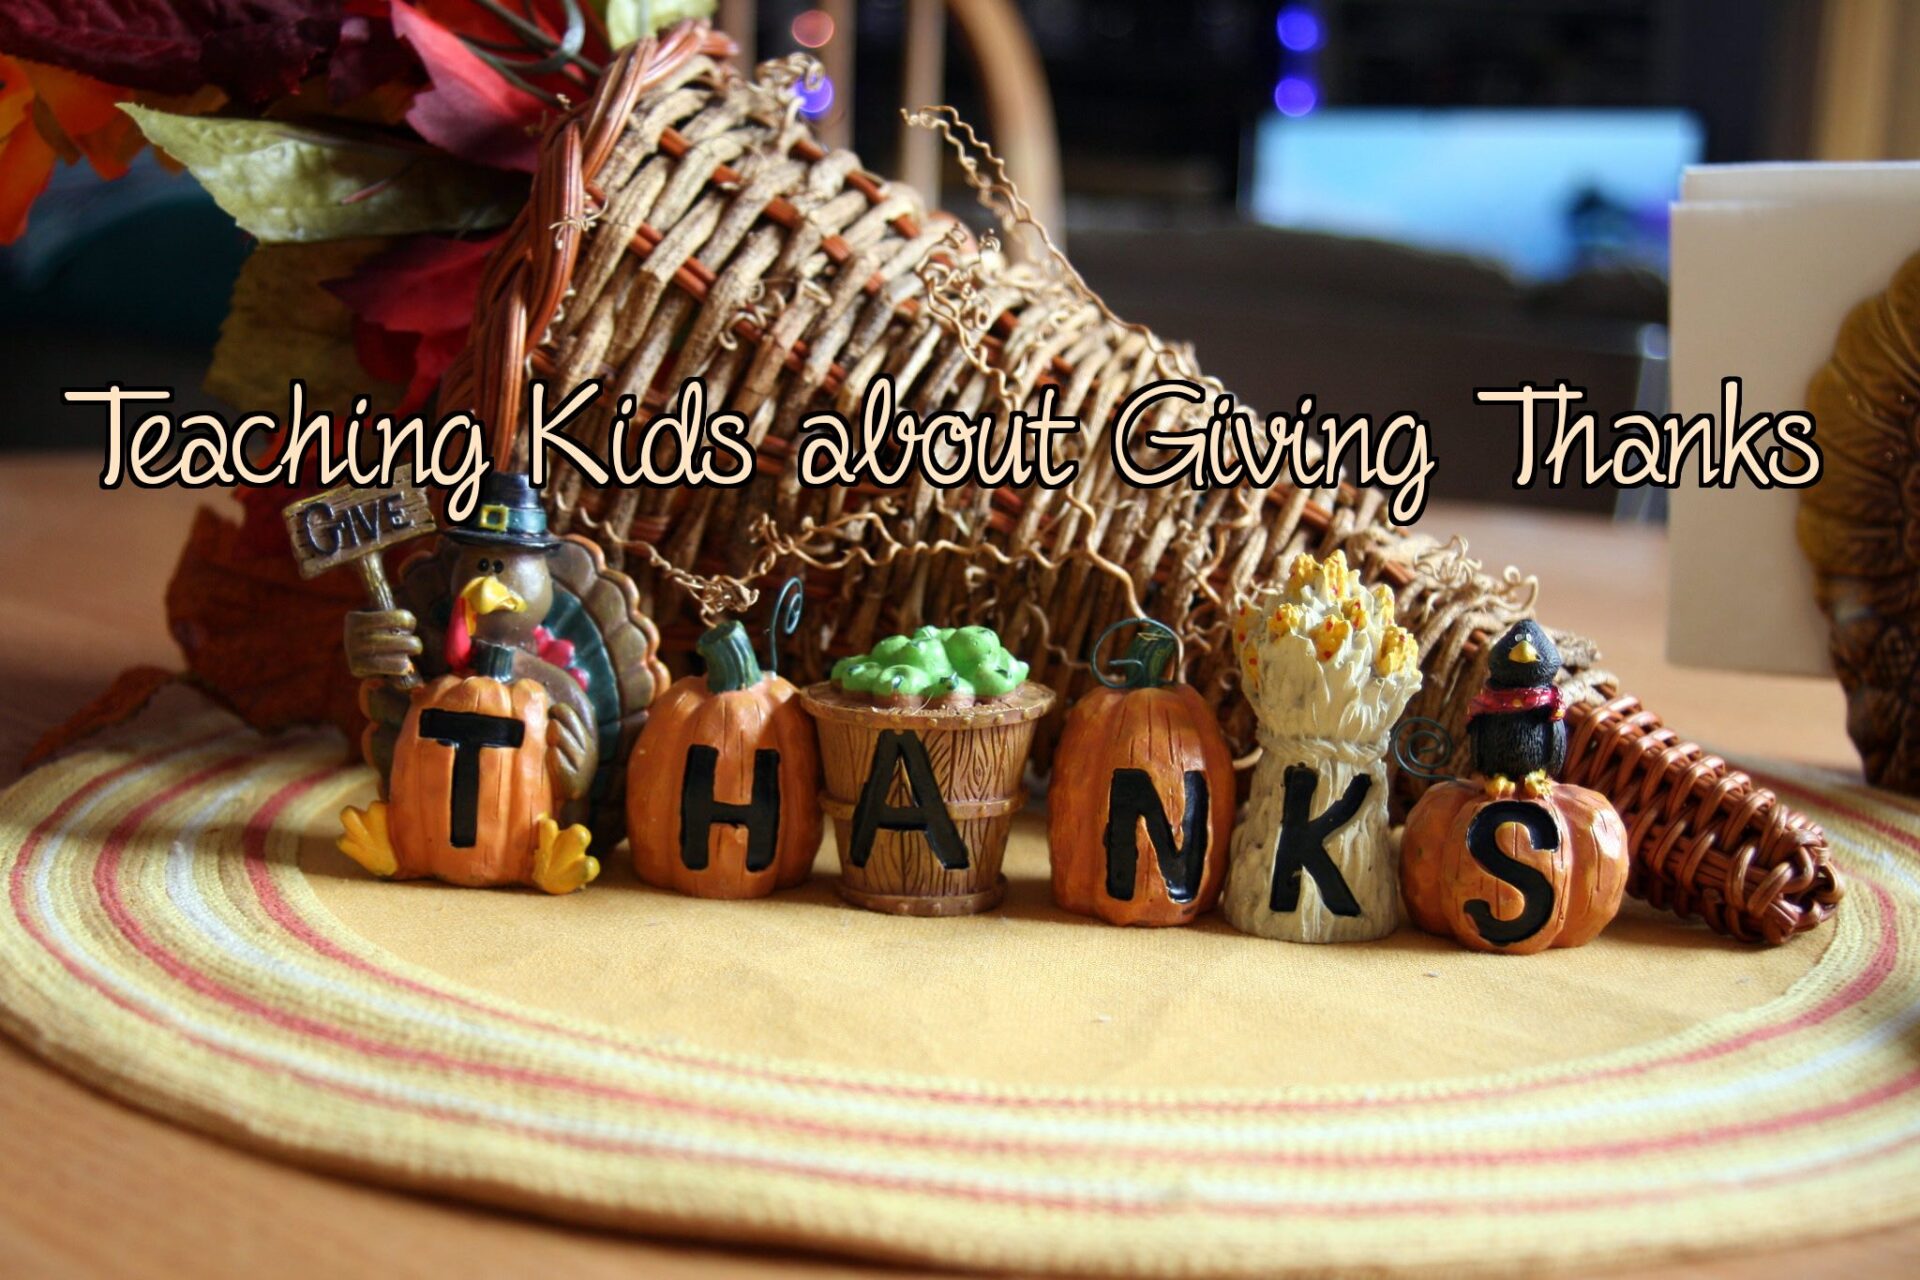 Teaching kids about giving thanks